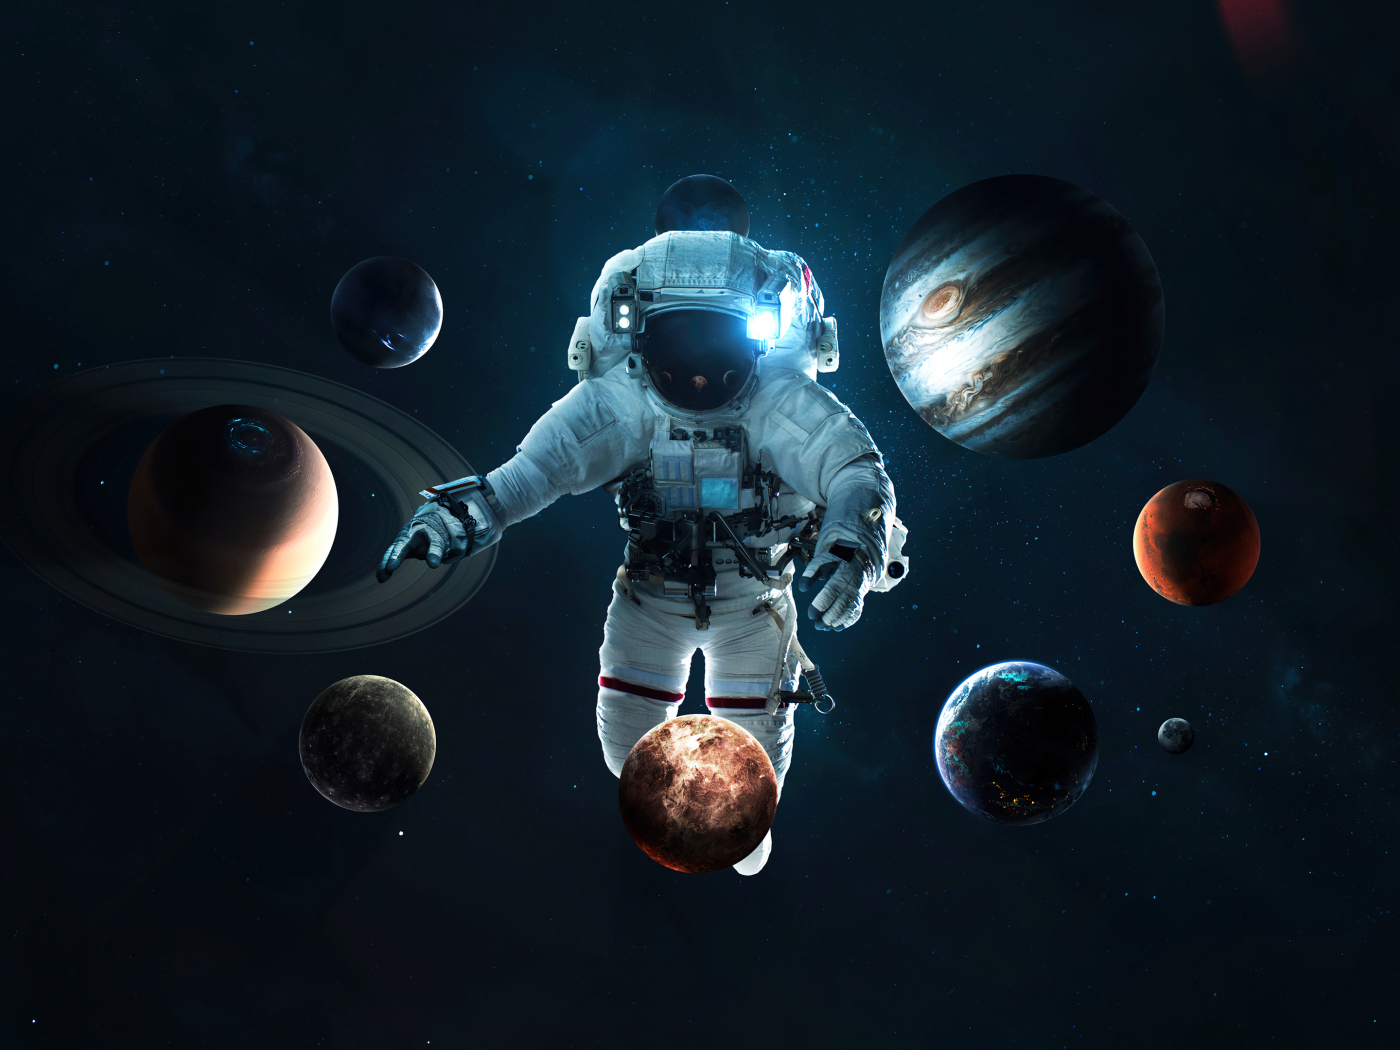 Planets spin around an astronaut in space